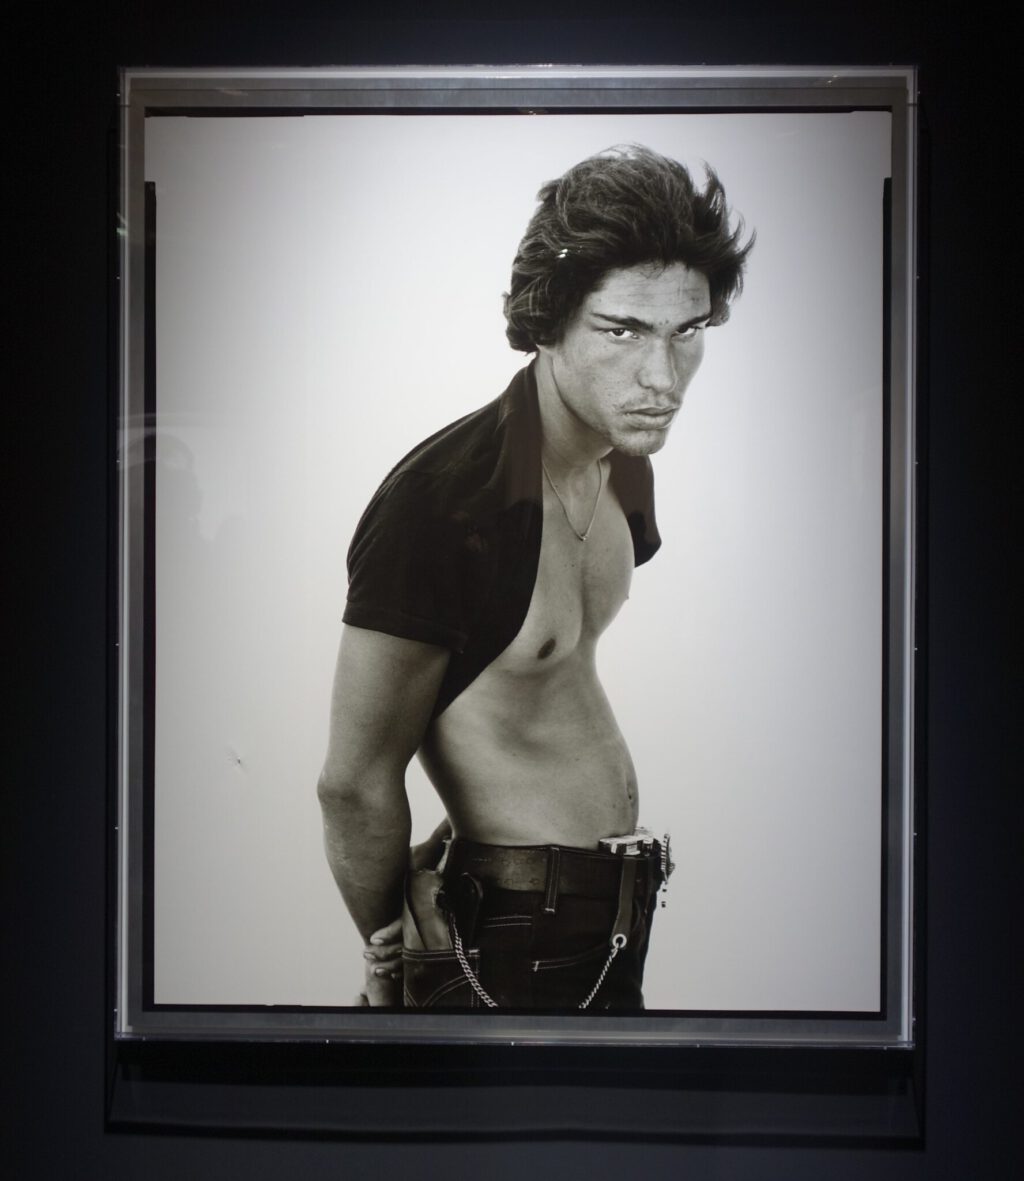 Richard Avedon Ten Exhibition Prints from “In the American West”, photographed 1979-1984; Gelatin silver print; 10 prints 212.4 x 173.7 x 7.5 cm (framed) each (Gagosian) @ Unlimited Art Basel 2023